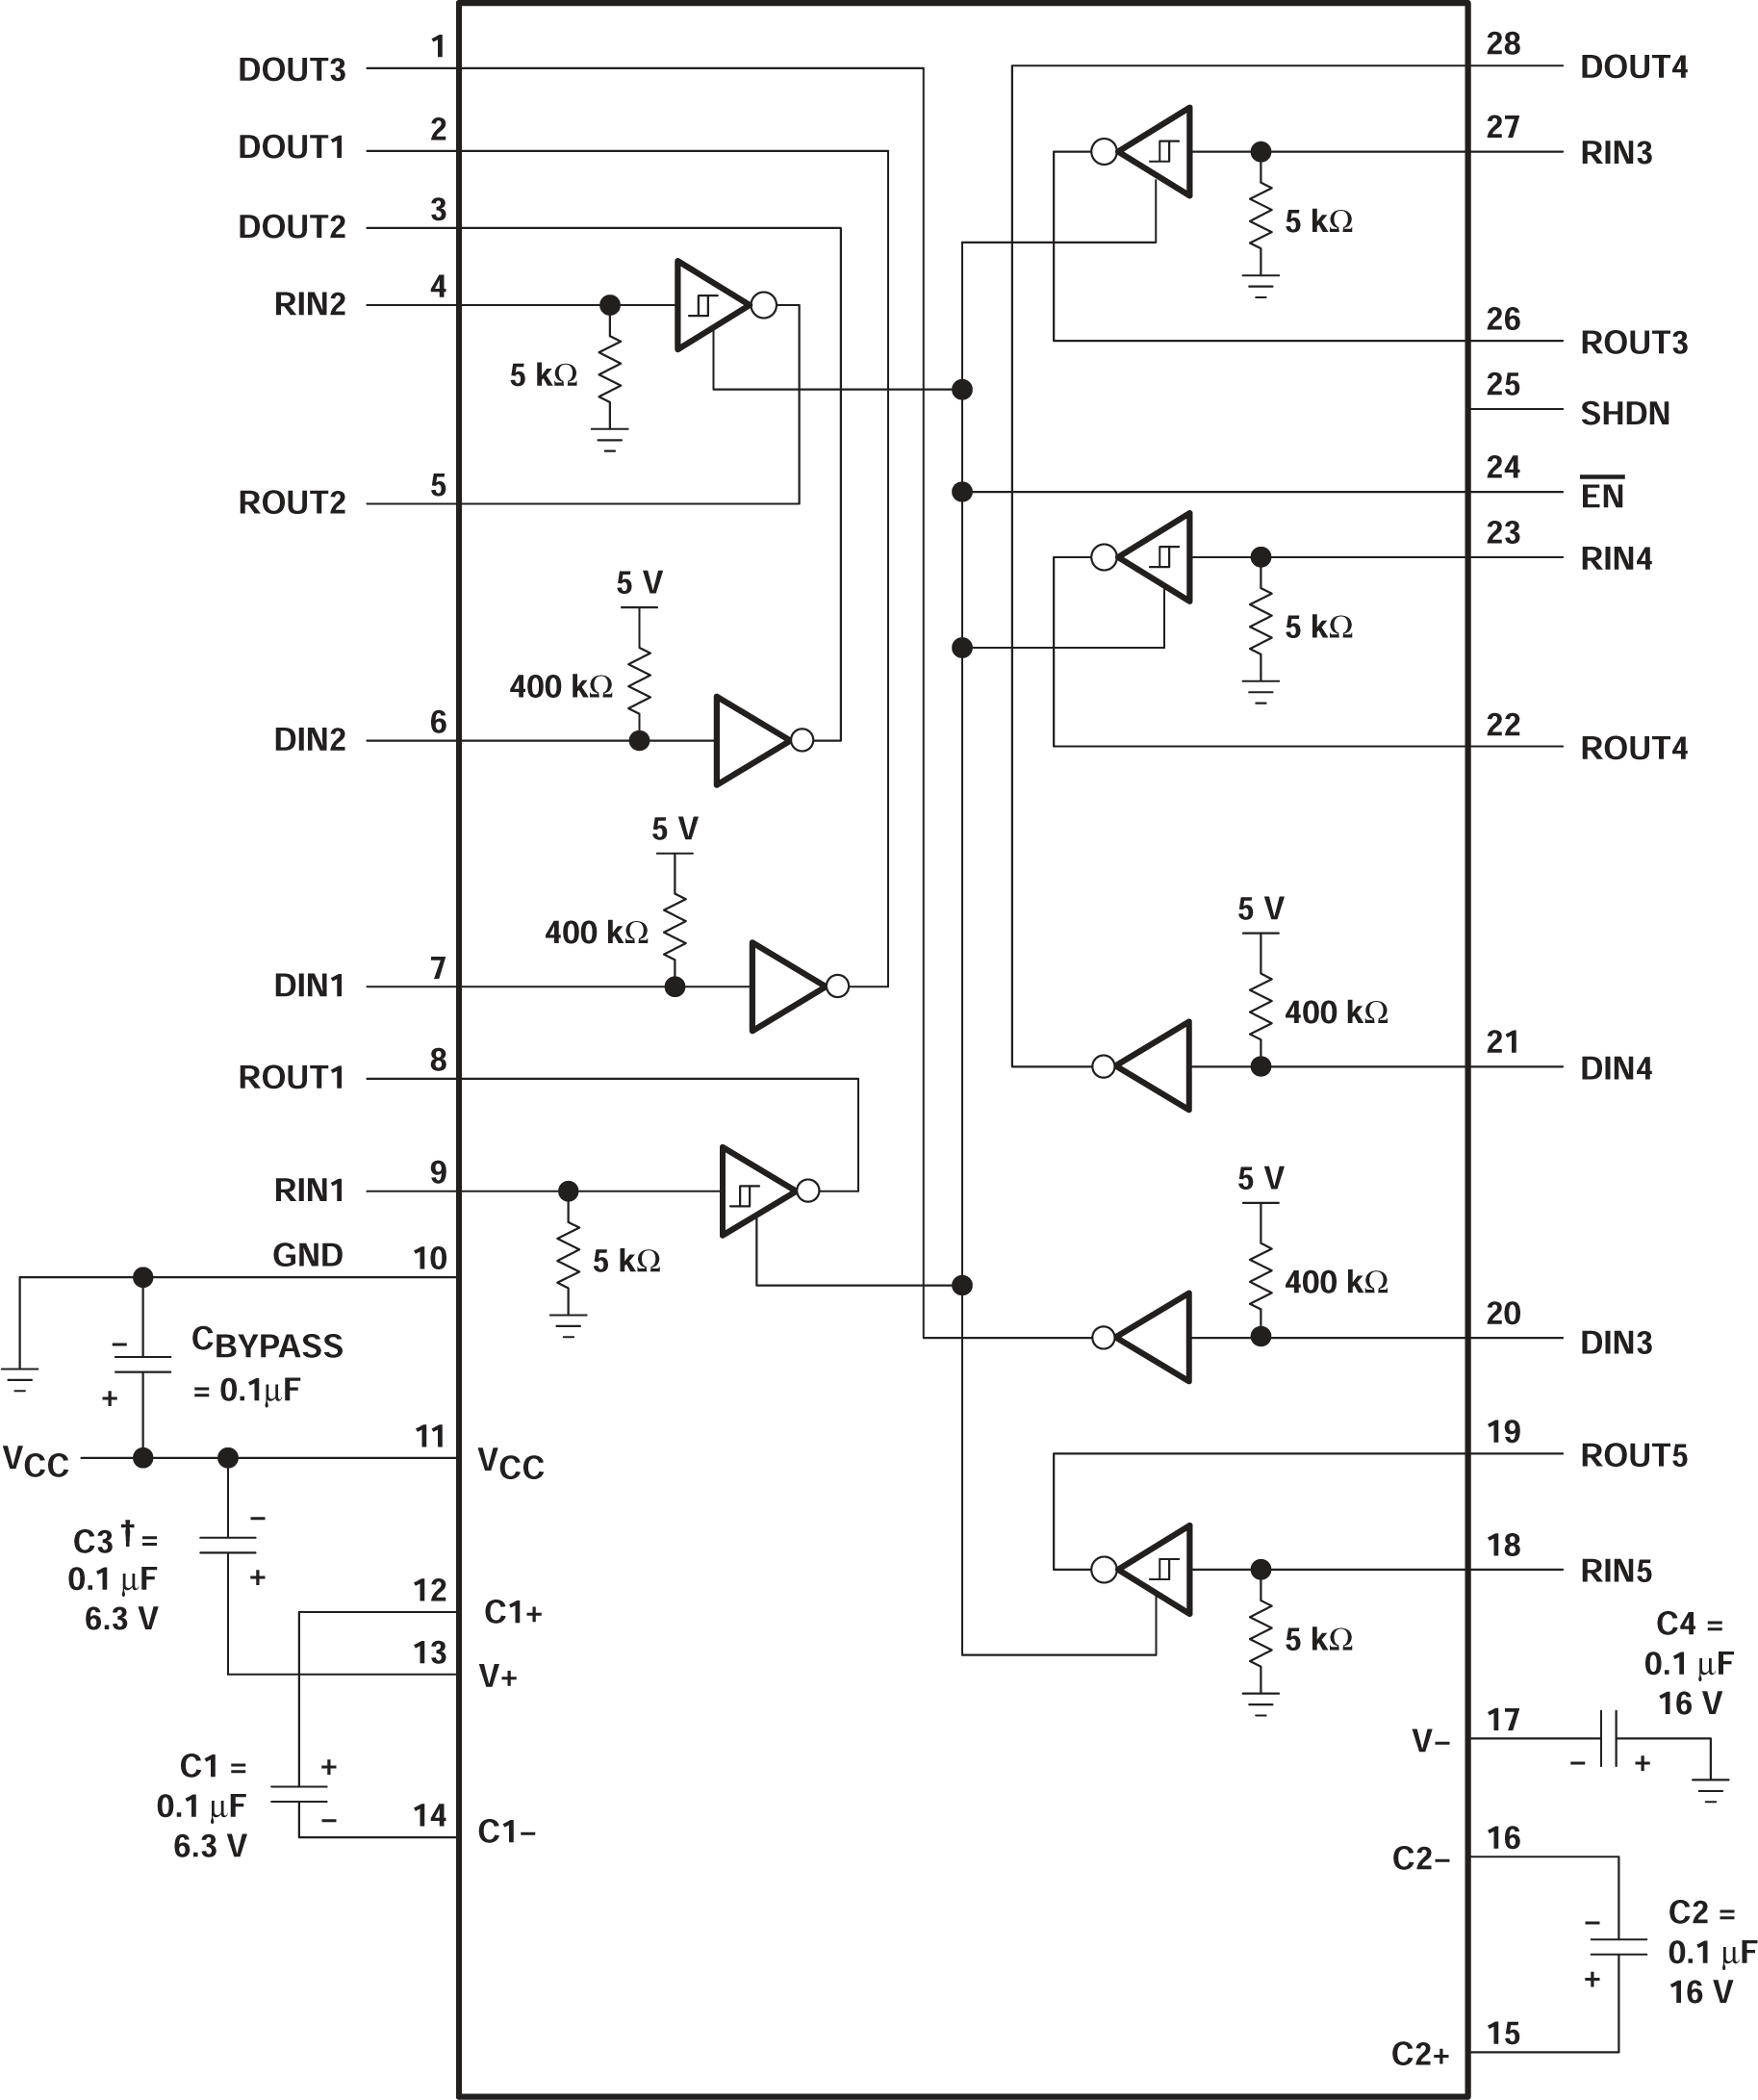 MAX211 Typical Operating Circuit and
                    Capacitor Values